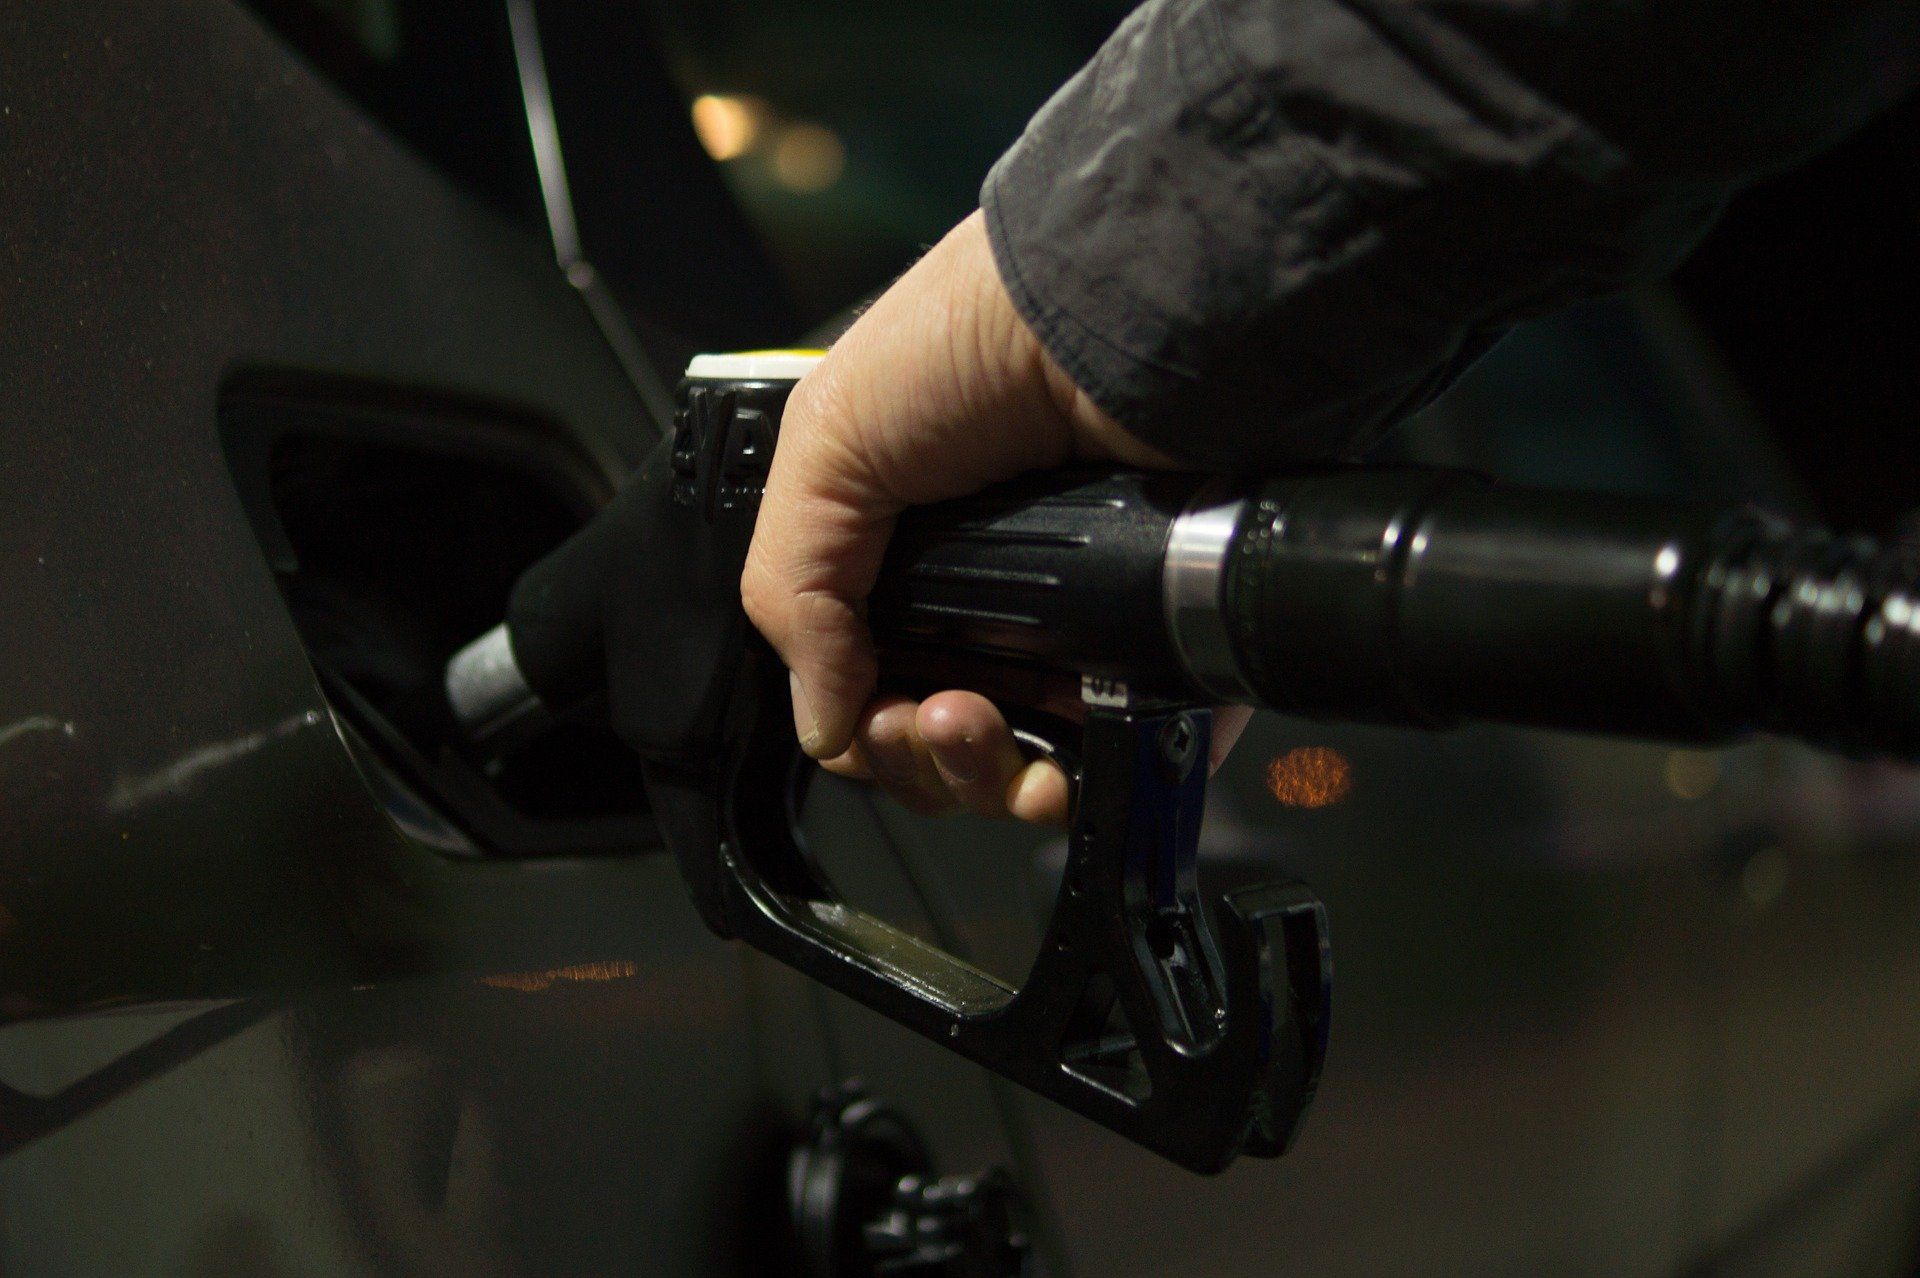 Fuel prices: Petrol priced at Rs 97.01, diesel Rs 88.27 in Delhi on March 24, 2022